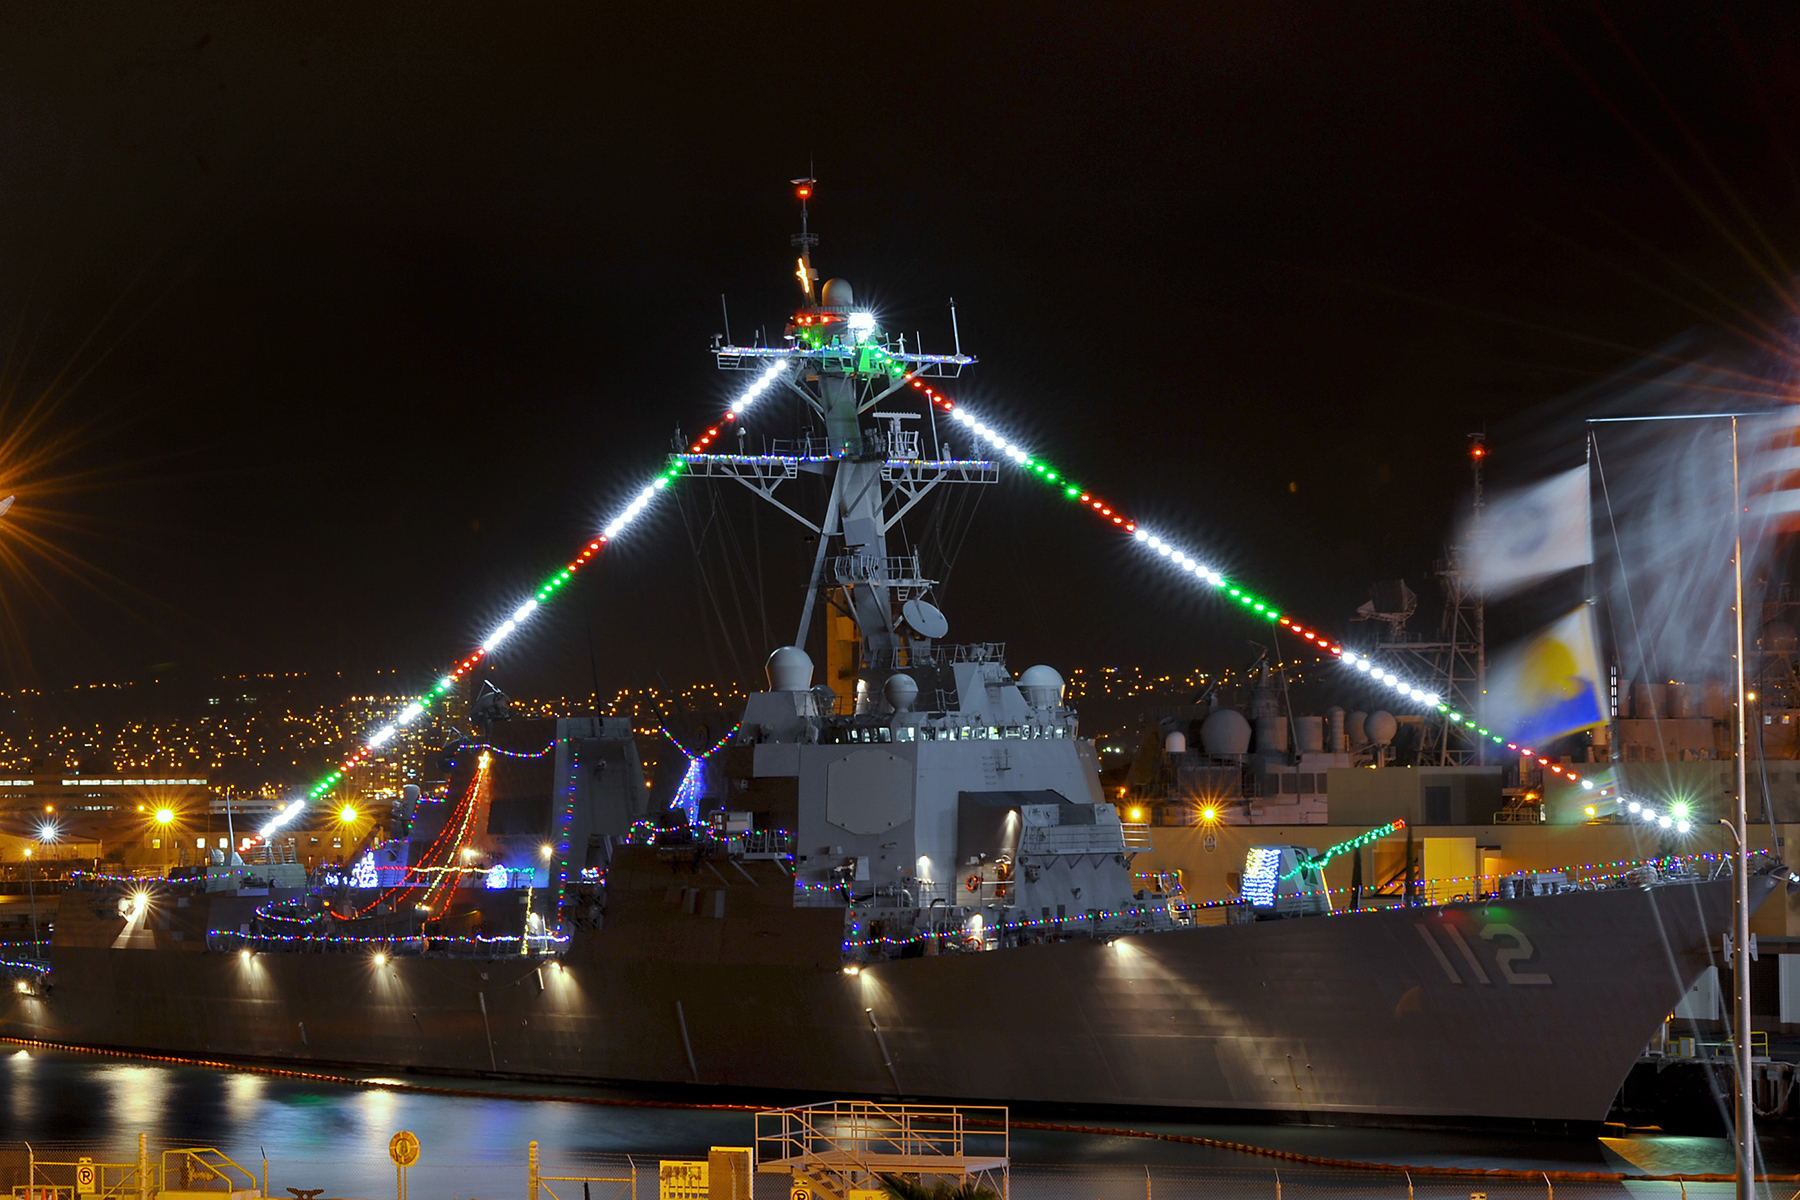 U.S. Navy ship is decorated with holiday lights